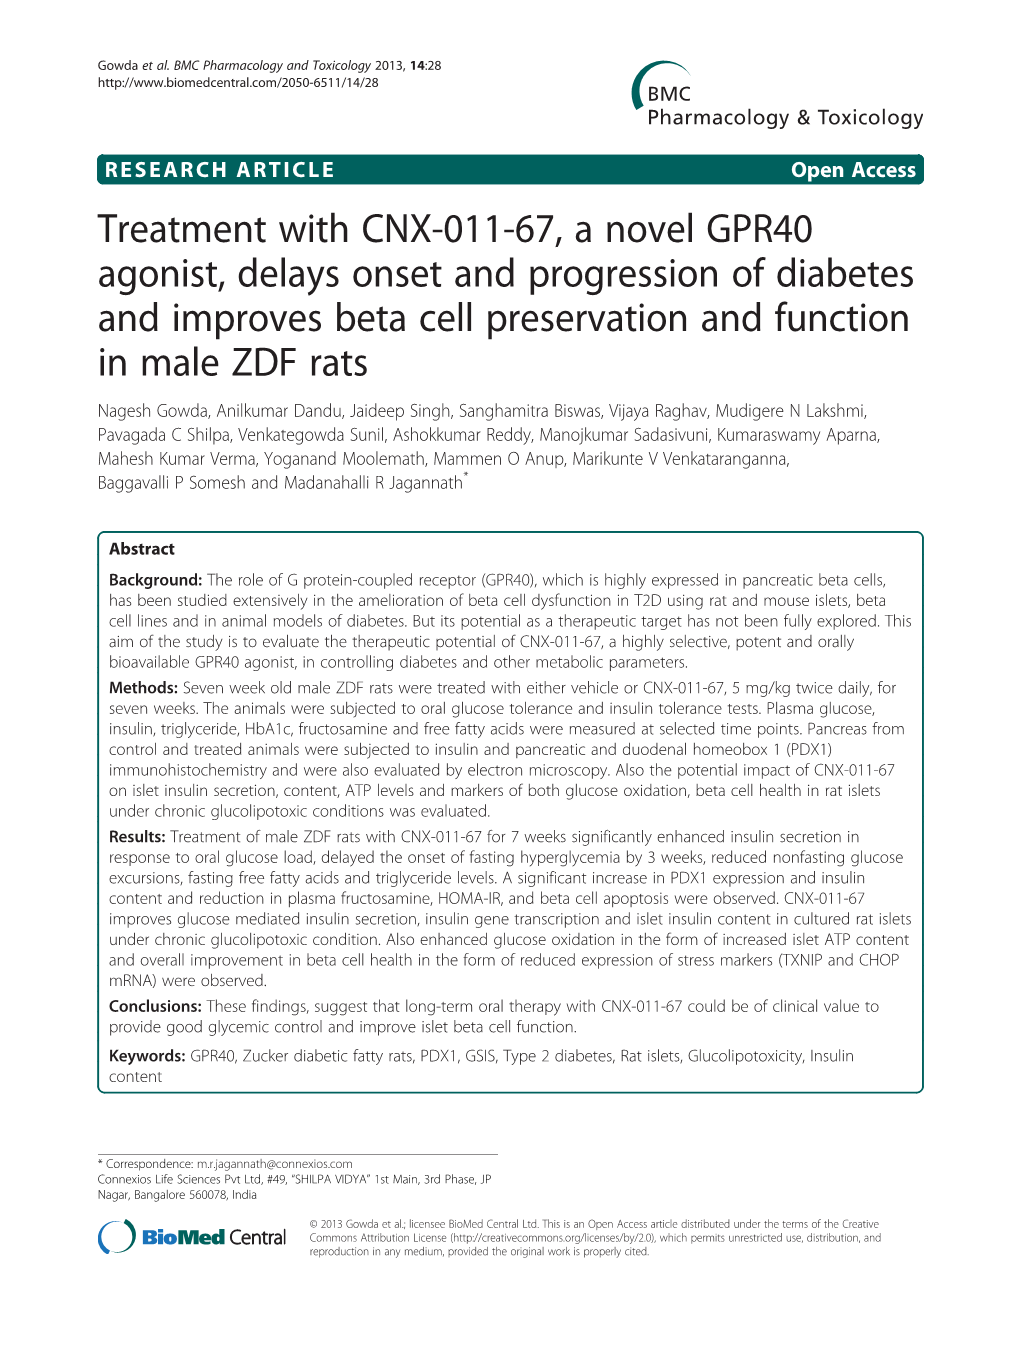 Treatment with CNX-011-67, a Novel GPR40 Agonist, Delays Onset And